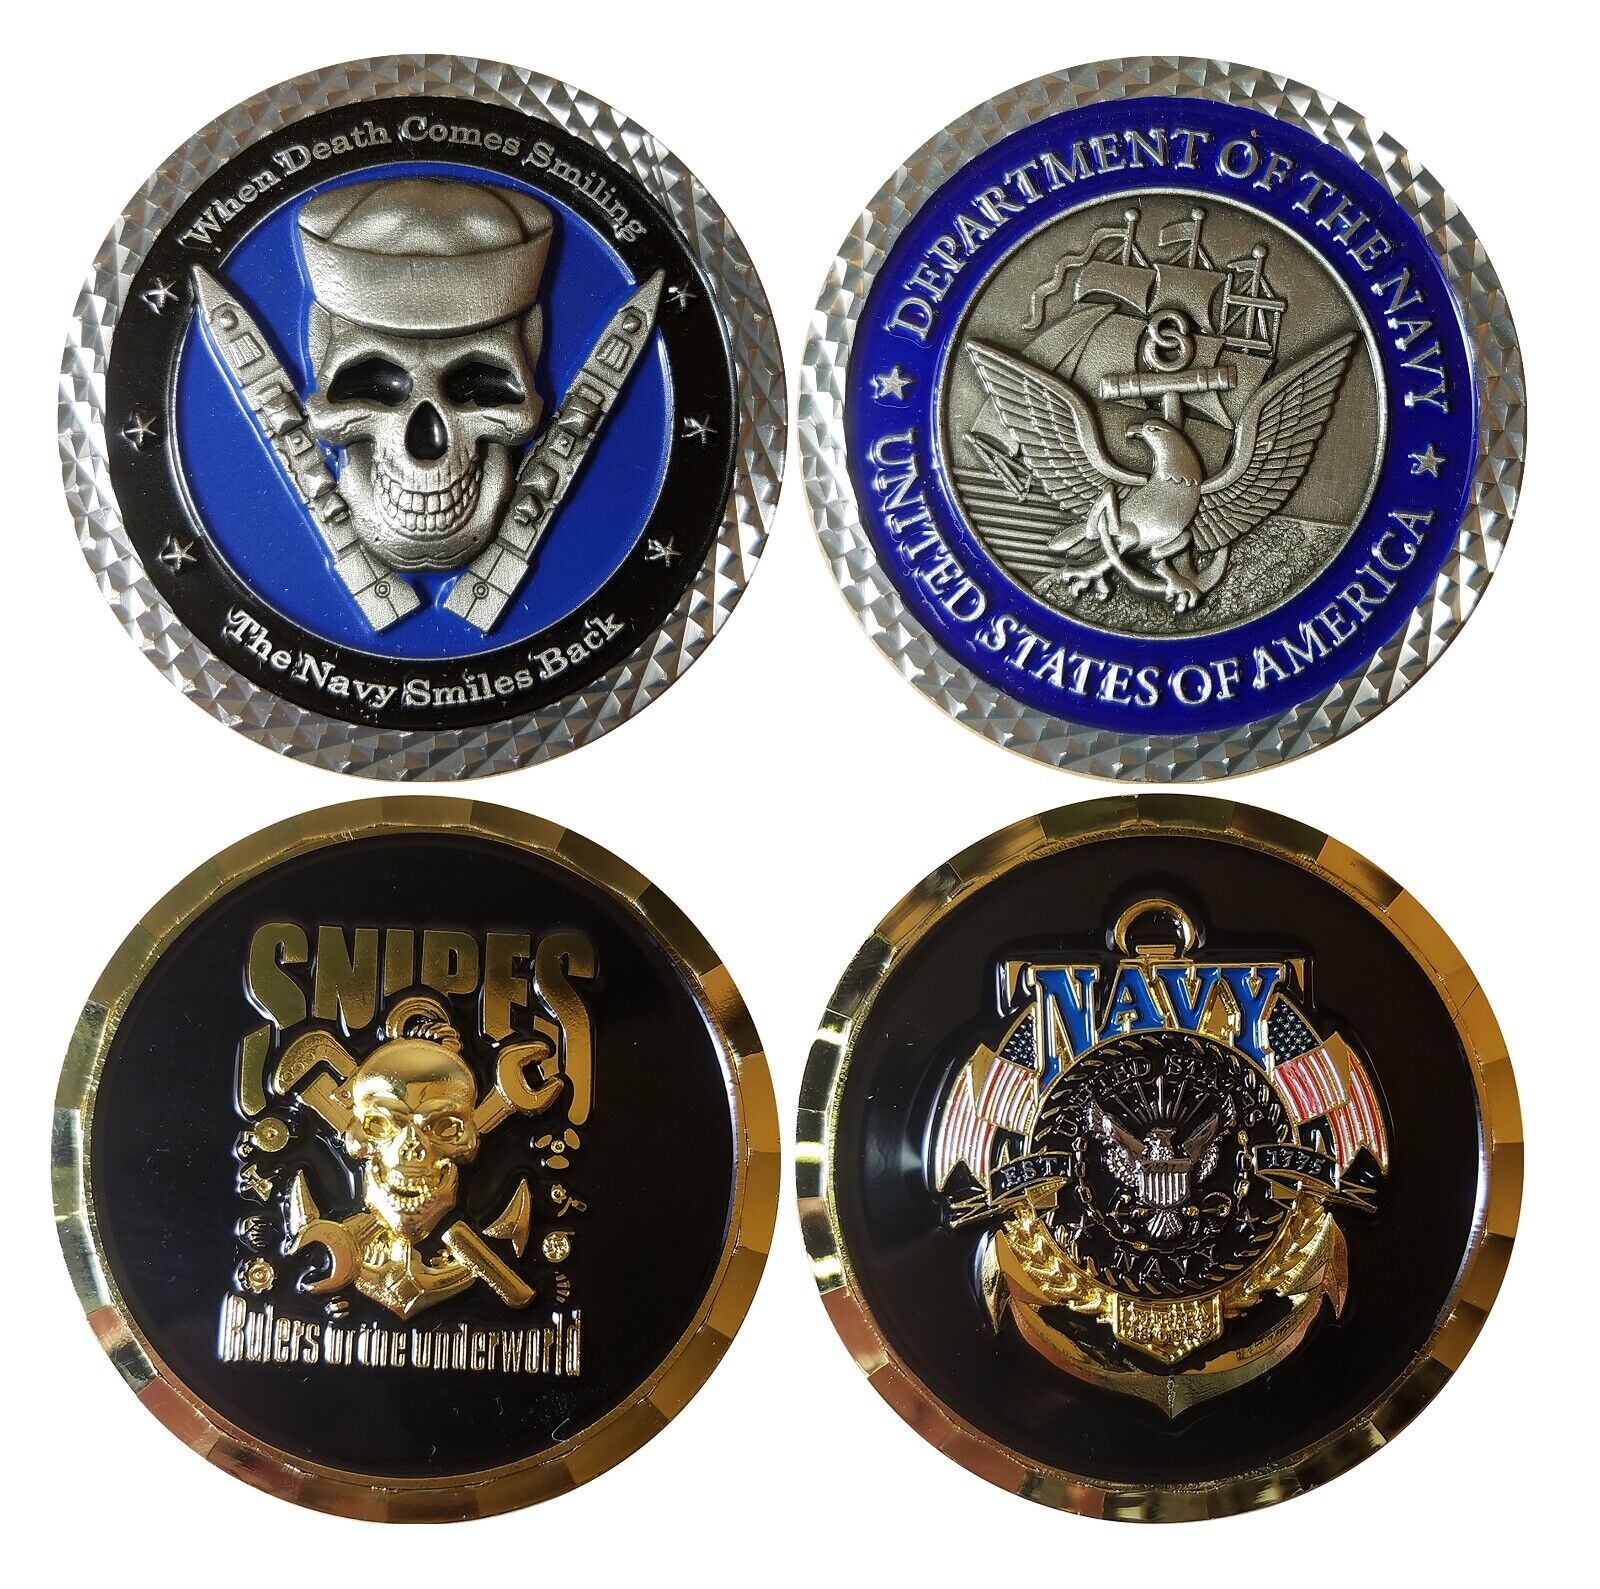 Set of 2 US Navy Challenge Coins US Navy engineering Snipes/death smiles 7-17